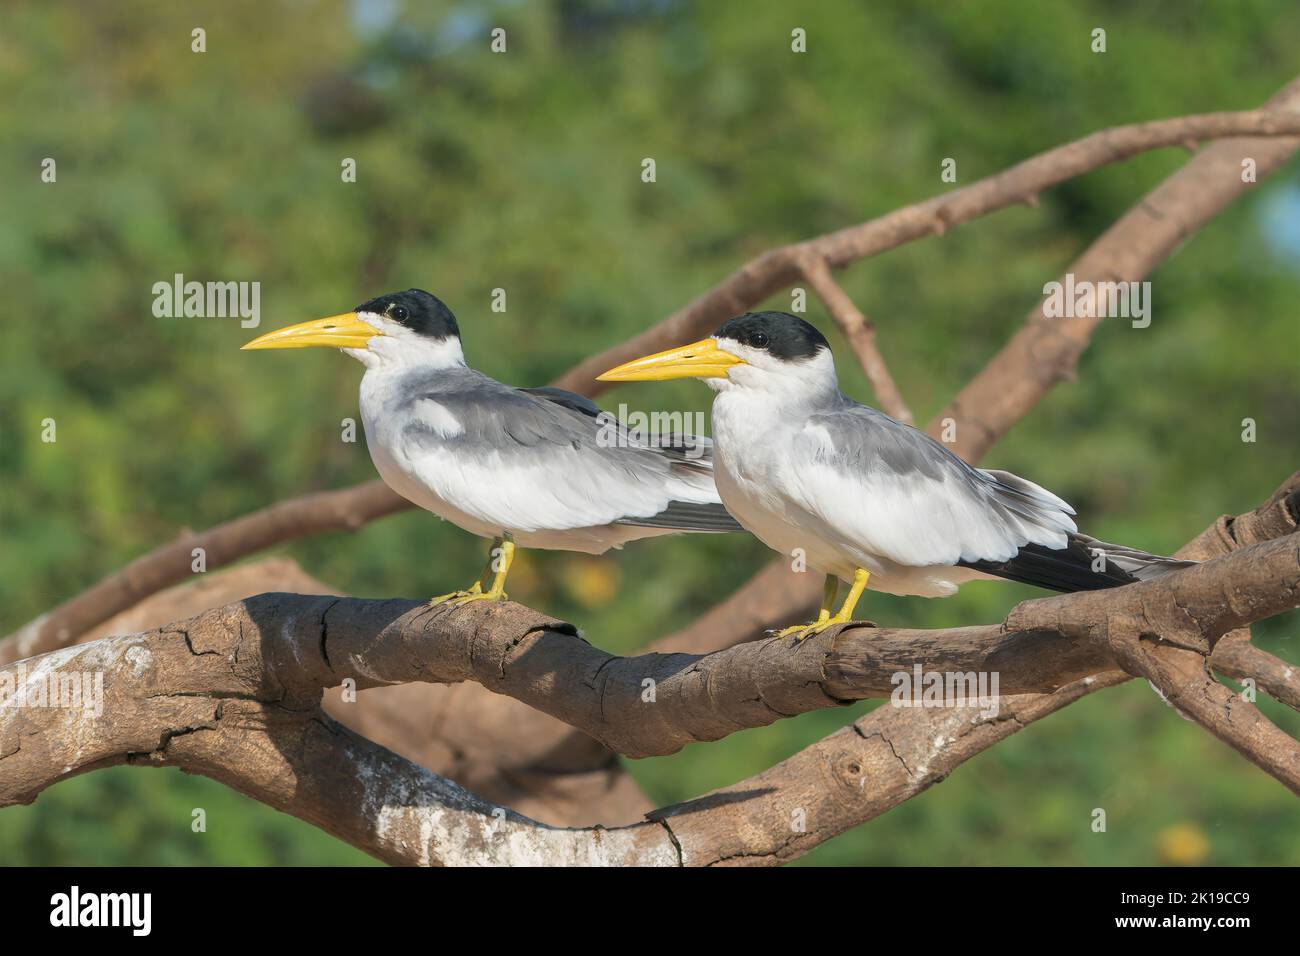 large-billed tern, Phaetusa simplex, two adults perched on branch, Pantanal, Brazil Stock Photo